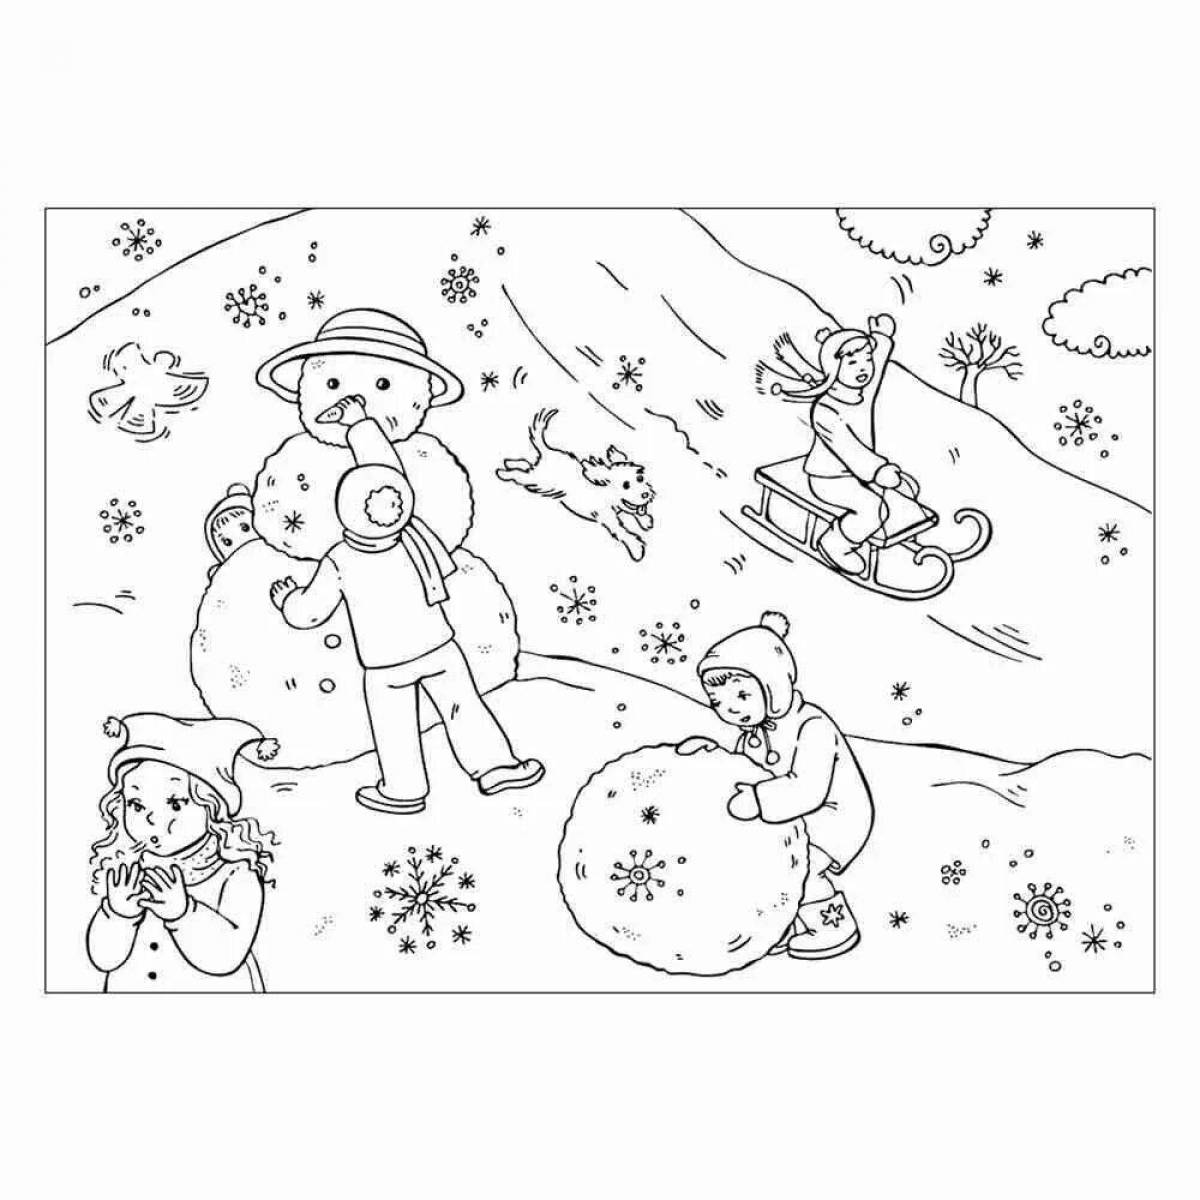 Outstanding Winter Games coloring page